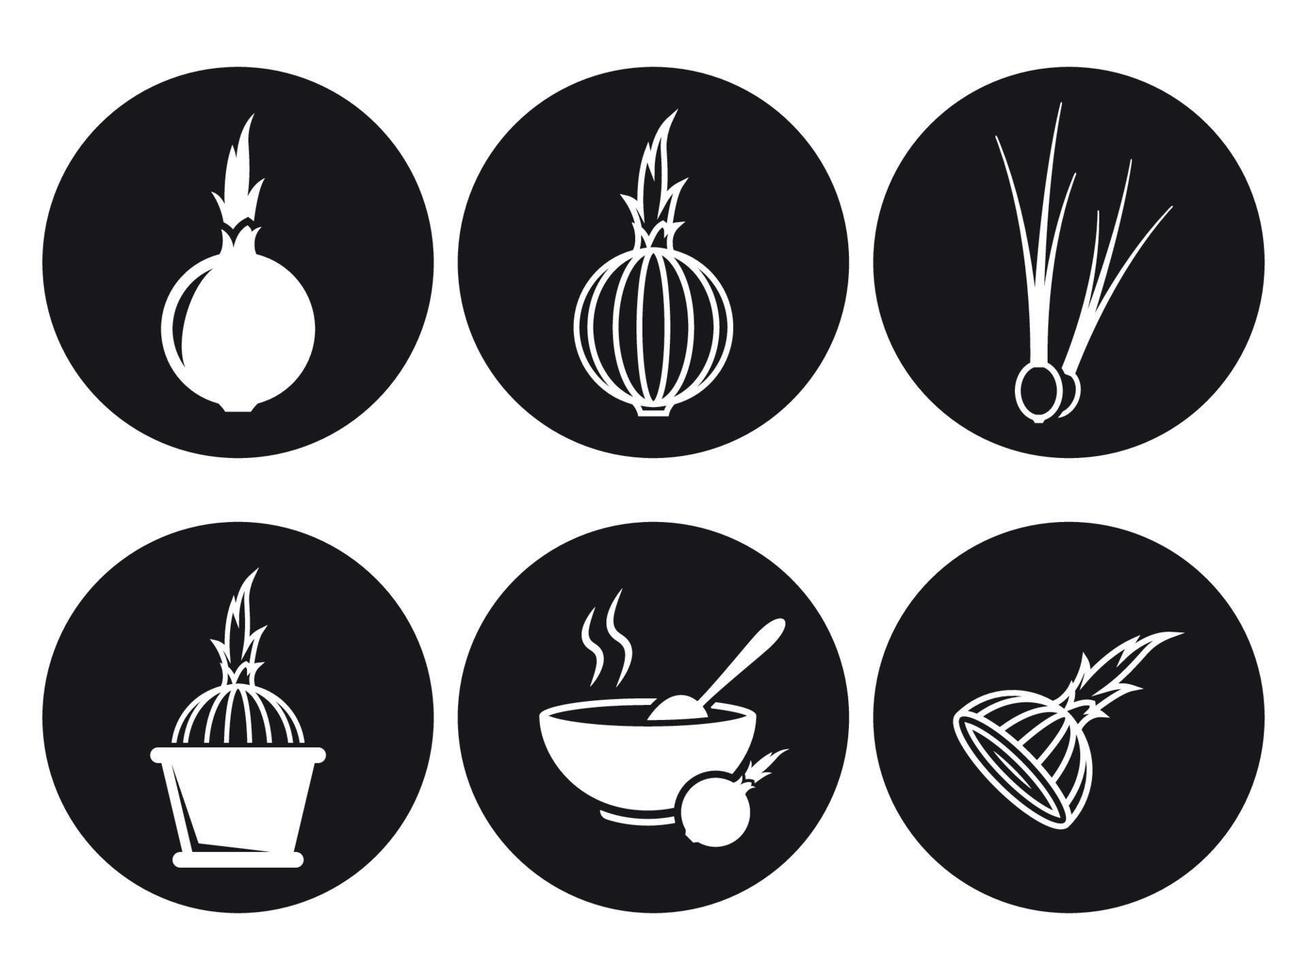 Onion icons set. White on a black background vector